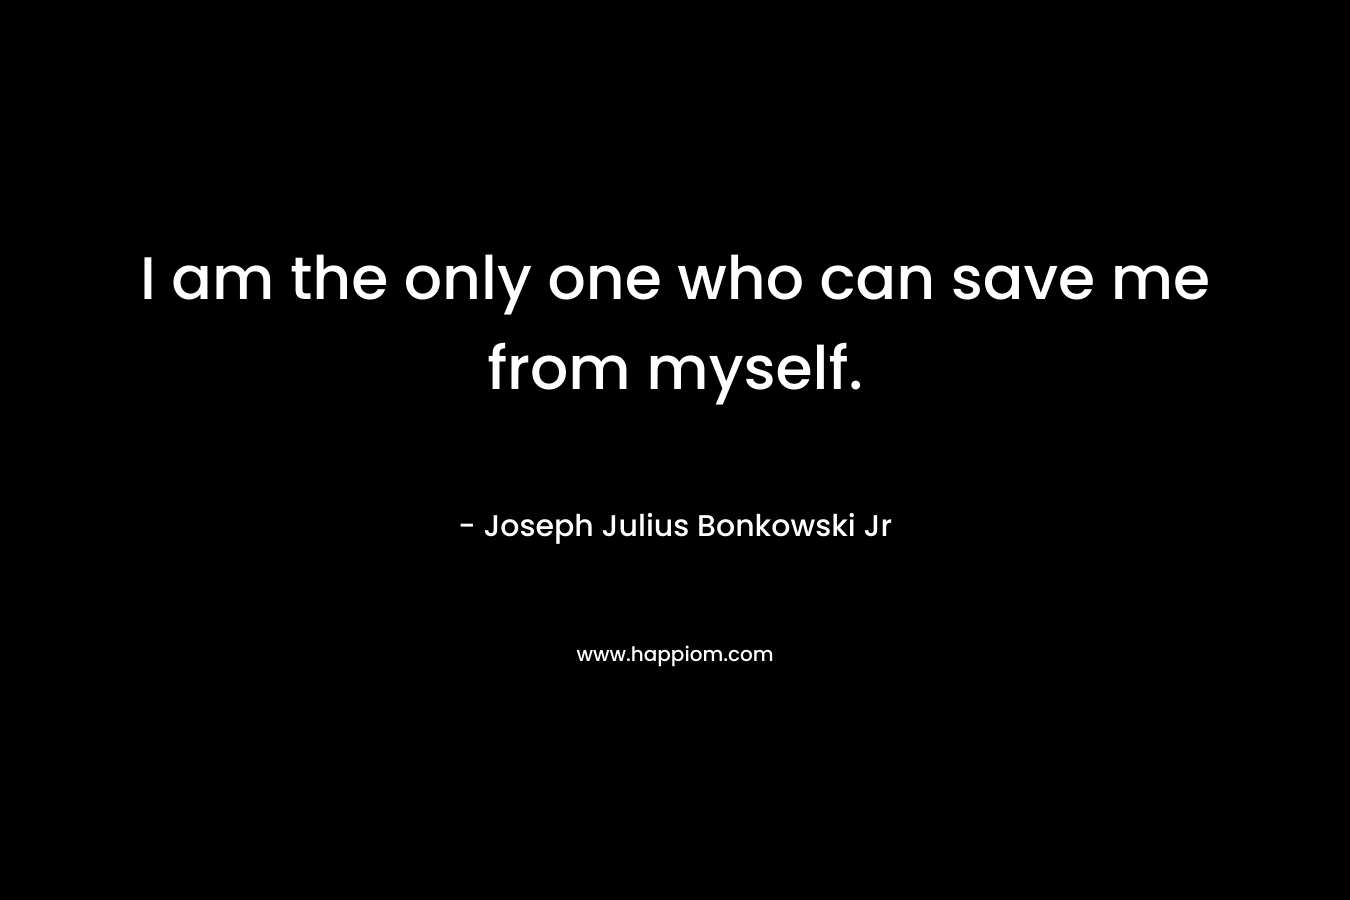 I am the only one who can save me from myself. – Joseph Julius Bonkowski Jr